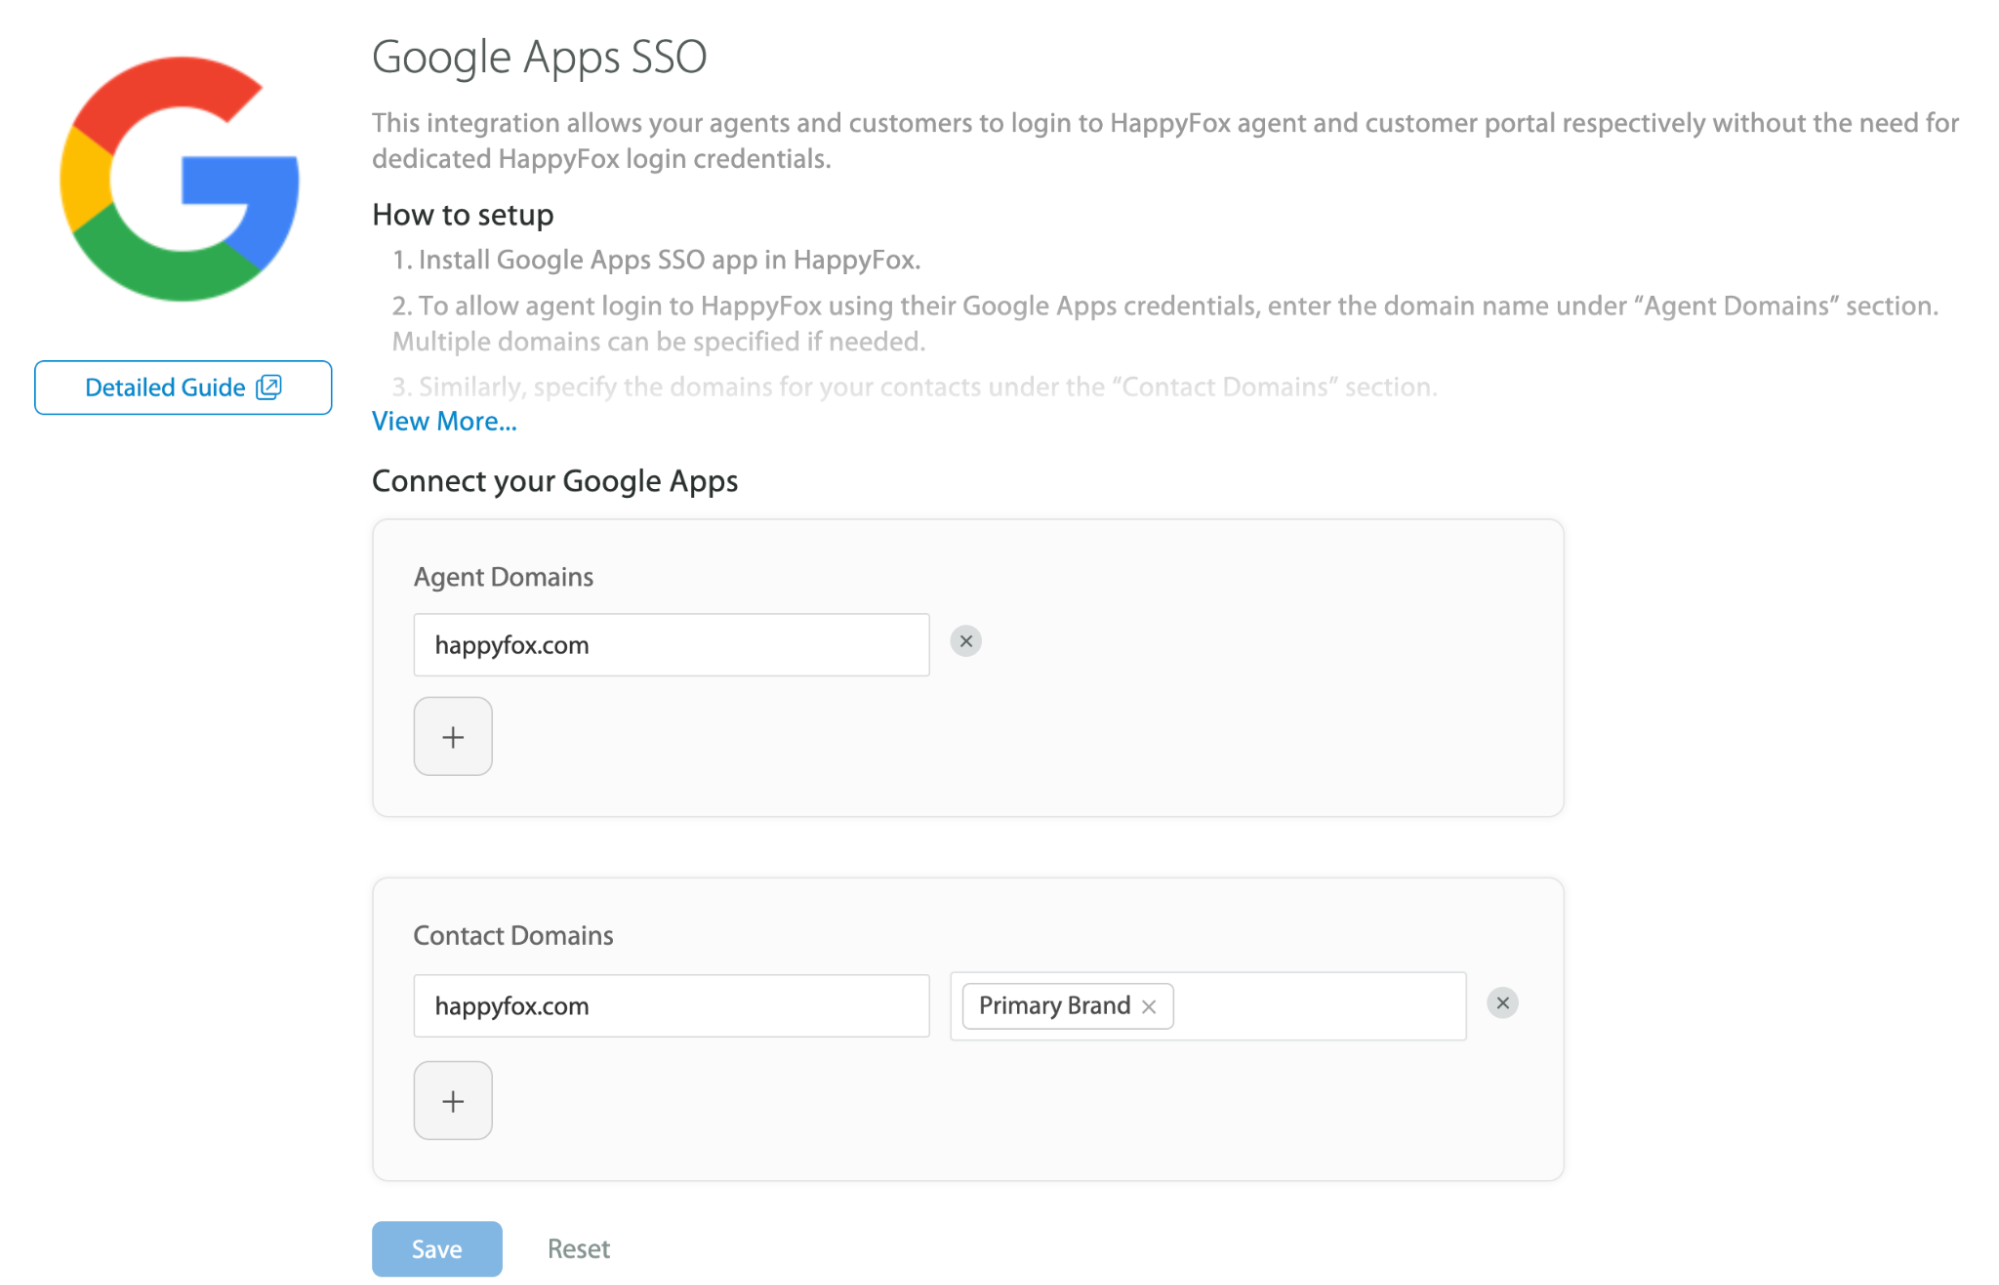 Key features of Google Apps SSO